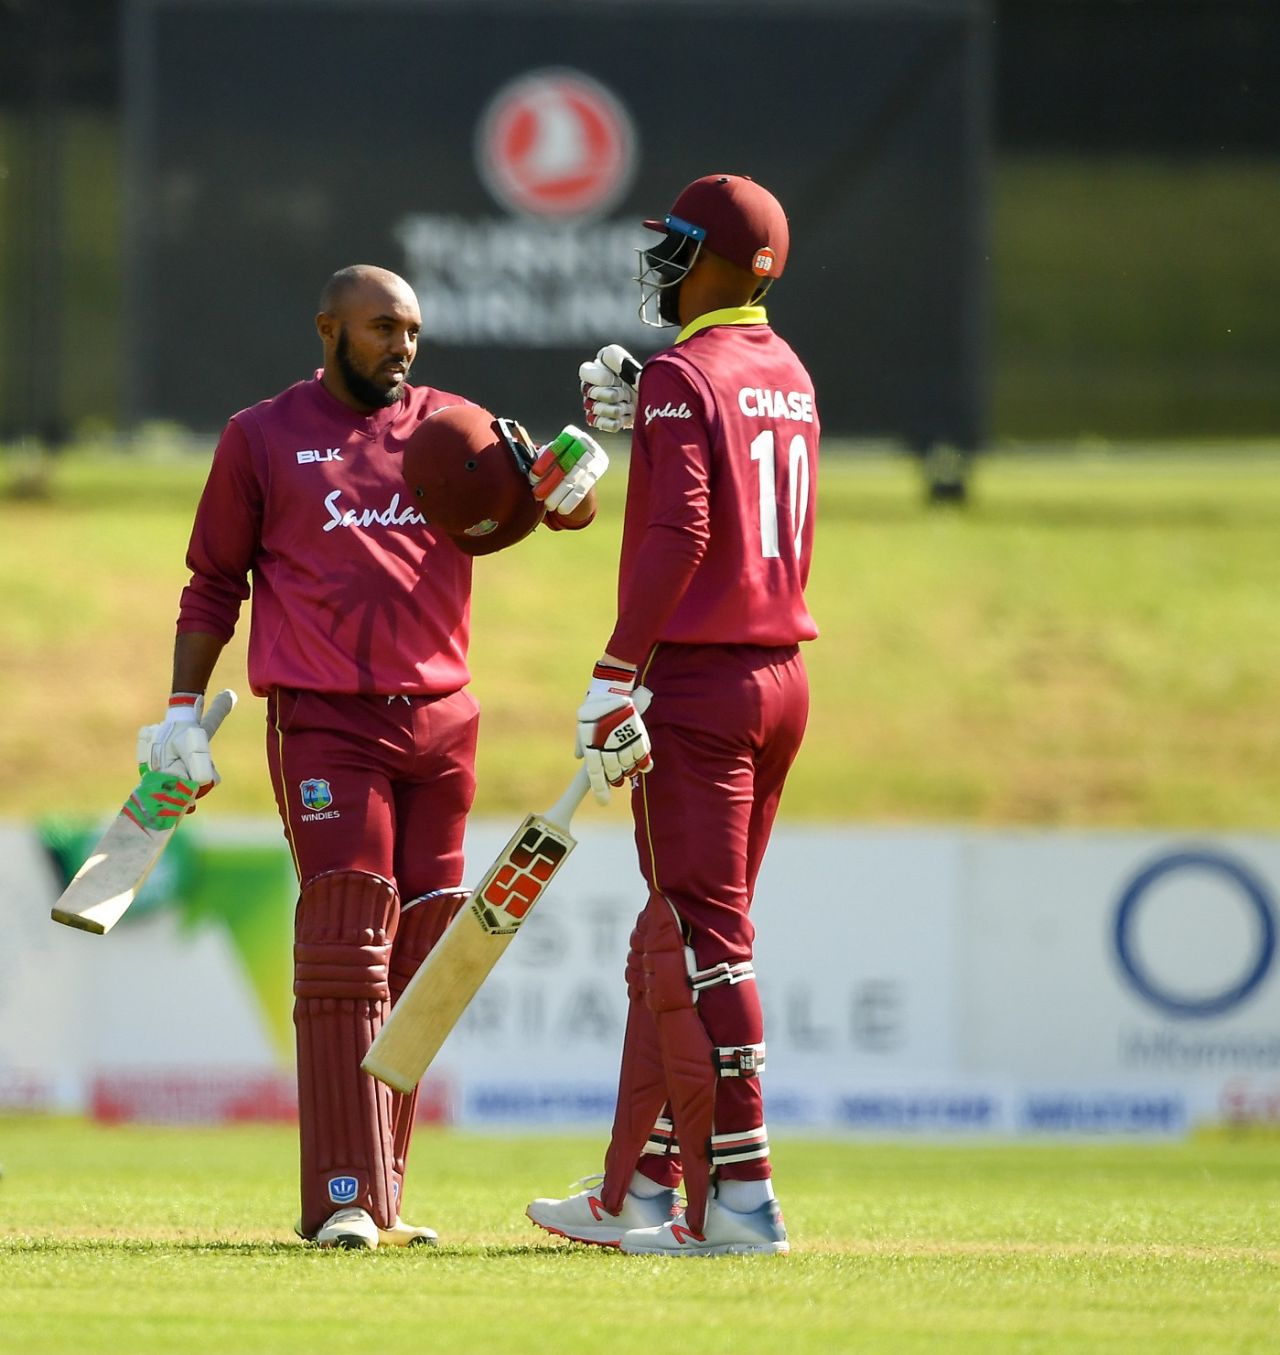 Sunil Ambris punches gloves with Roston Chase after his maiden ODI century, Ireland v West Indies, Match 4, Ireland tri-series, Dublin, May 11, 2019